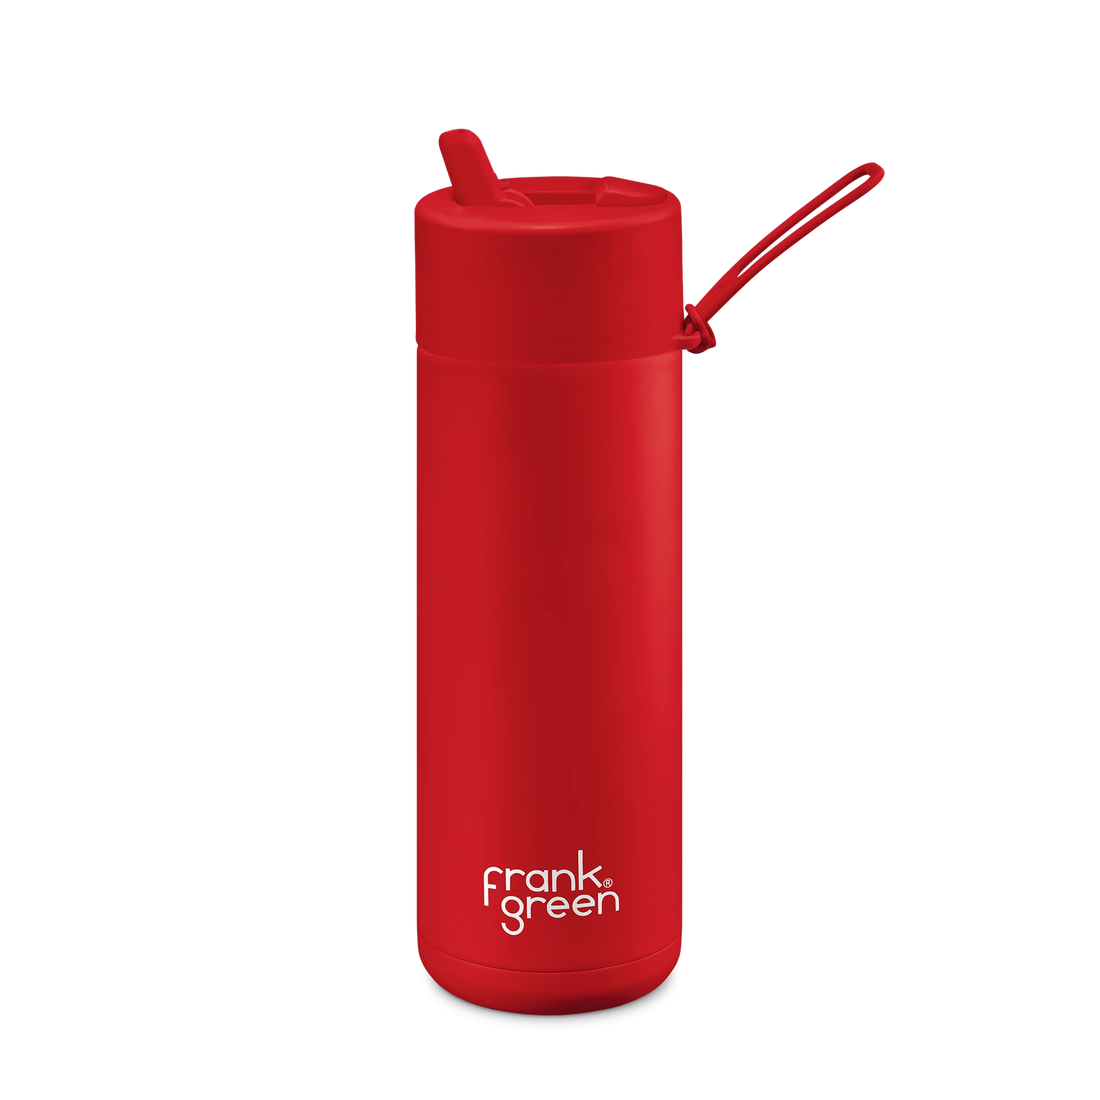 Frank Green Stainless Steel Ceramic Reusable Bottle Atomic Red With Straw 20oz/595ml